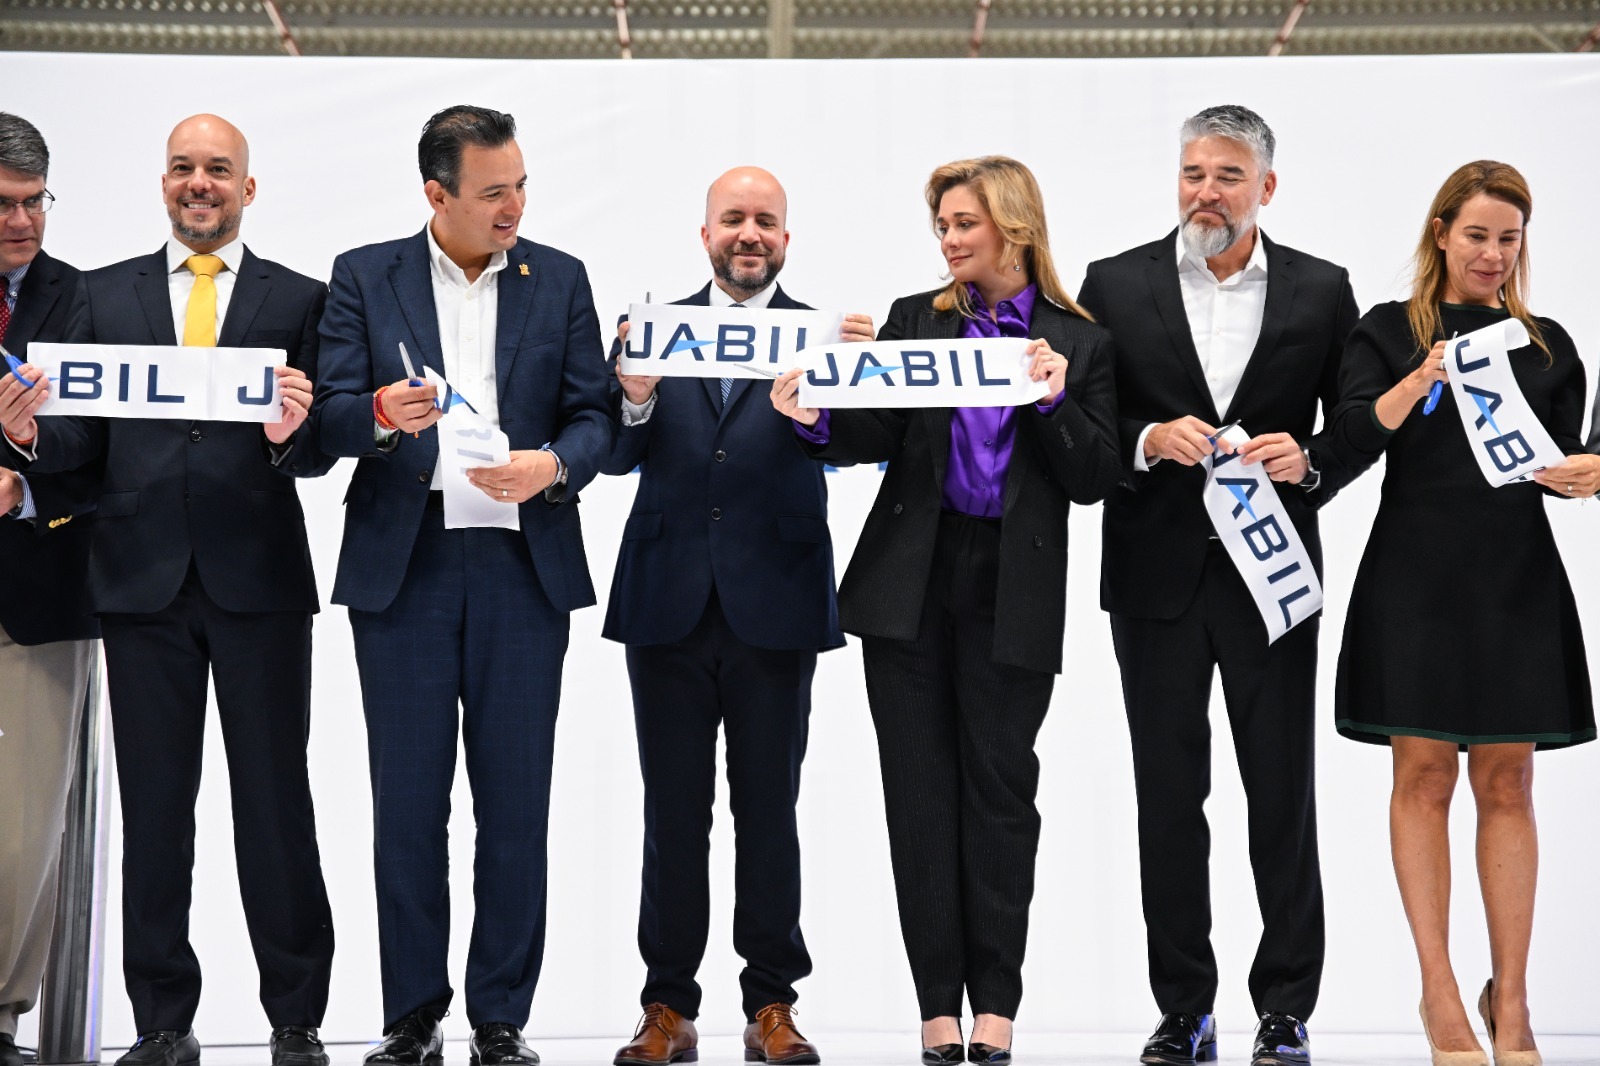 Jabil inaugurates third manufacturing plant in Chihuahua